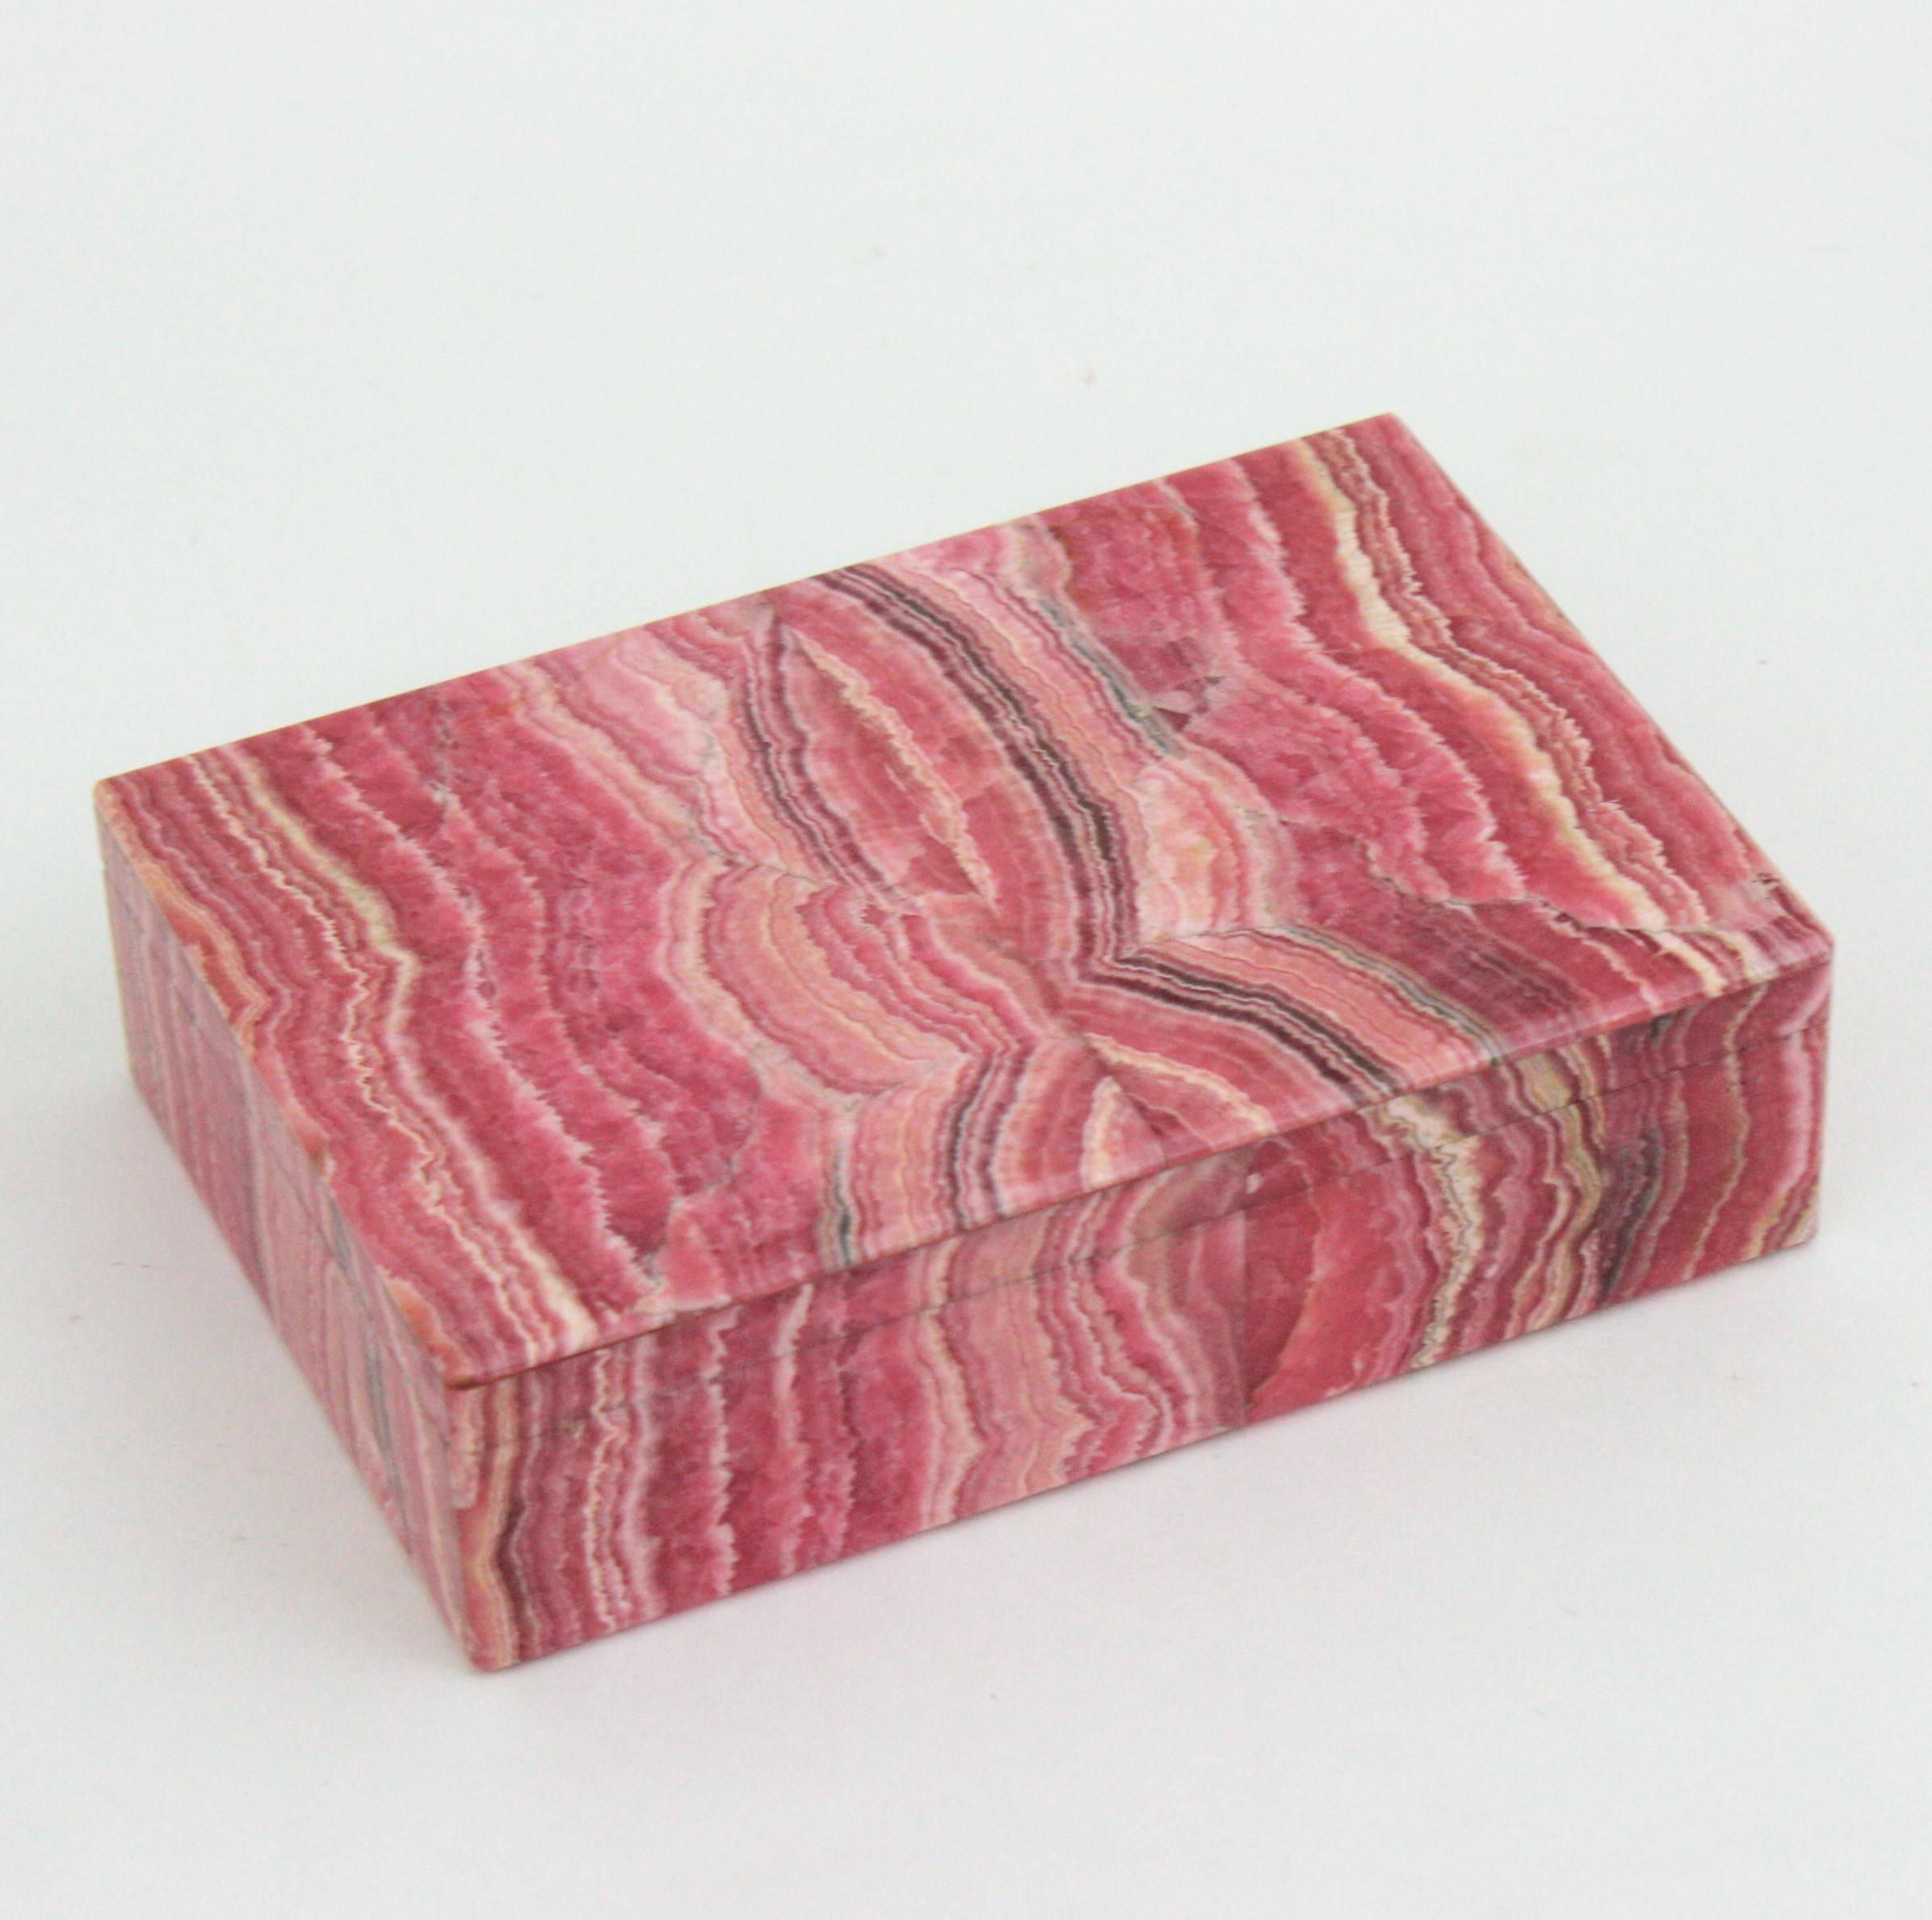 Outstanding Mid-Century Modern hinged box veneered in fine Rhodochrosite, Spain, 1950s.
Rhodochrosite is a rare mineral, used in many decorative forms including jewelry. In its rare pure form its typically a rose-red color. 
This exquisite vintage